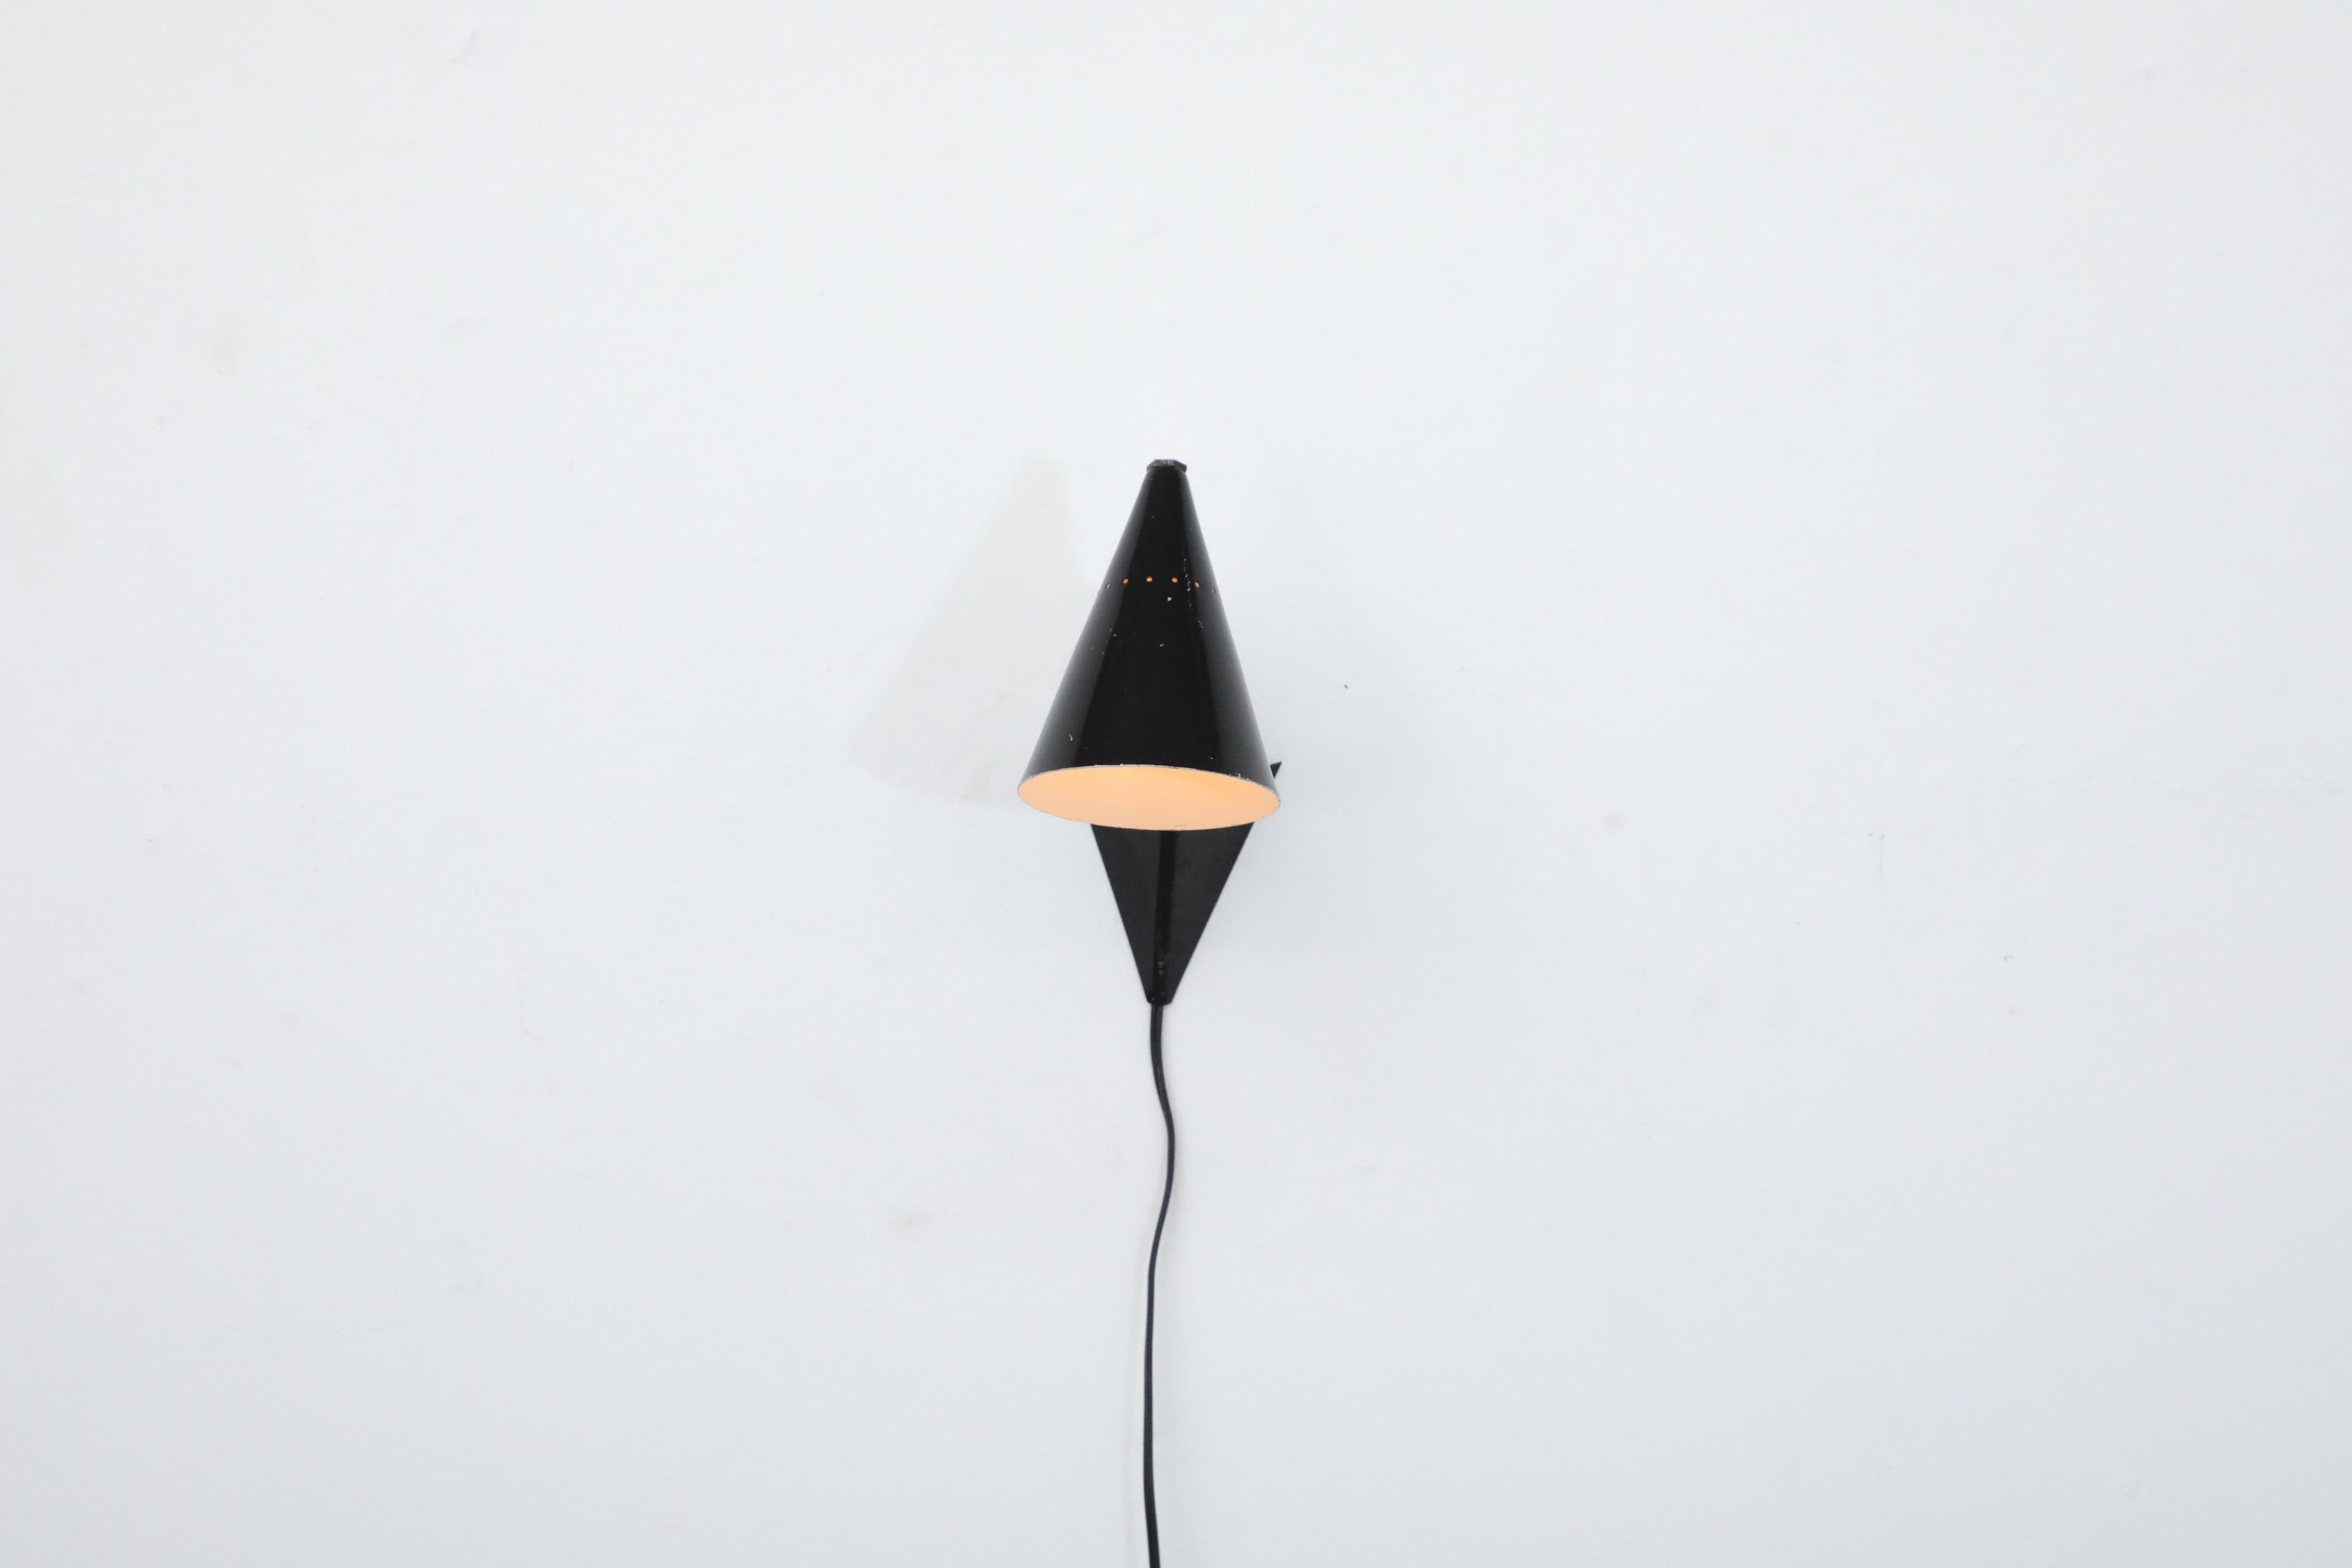 Mid-Century Anvia attributed black enameled wall mounted sconce with adjustable cone shaped shade, triangular base and brass stem. In original condition with visible wear, including chips, consistent with its age and use.